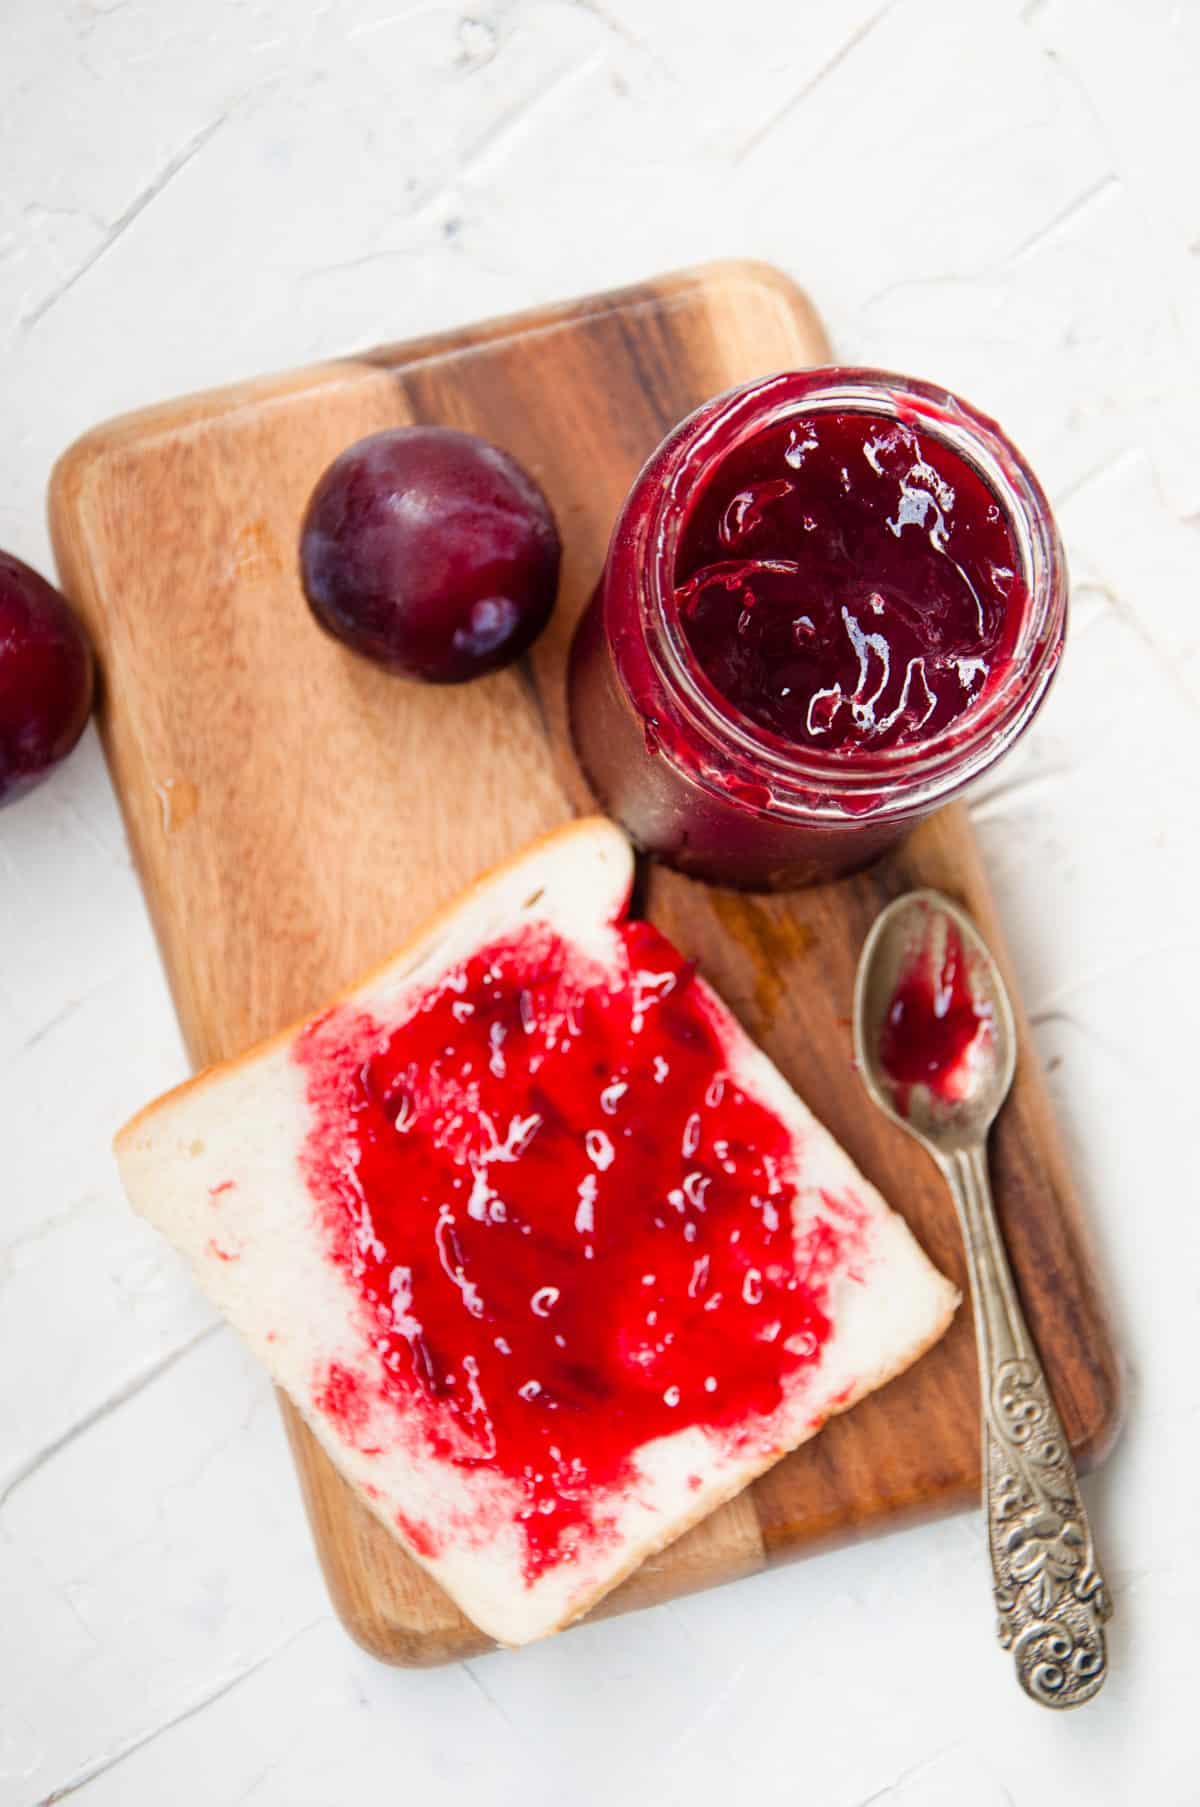 Plum jam in a jar with some jam spread on a slice of bread.